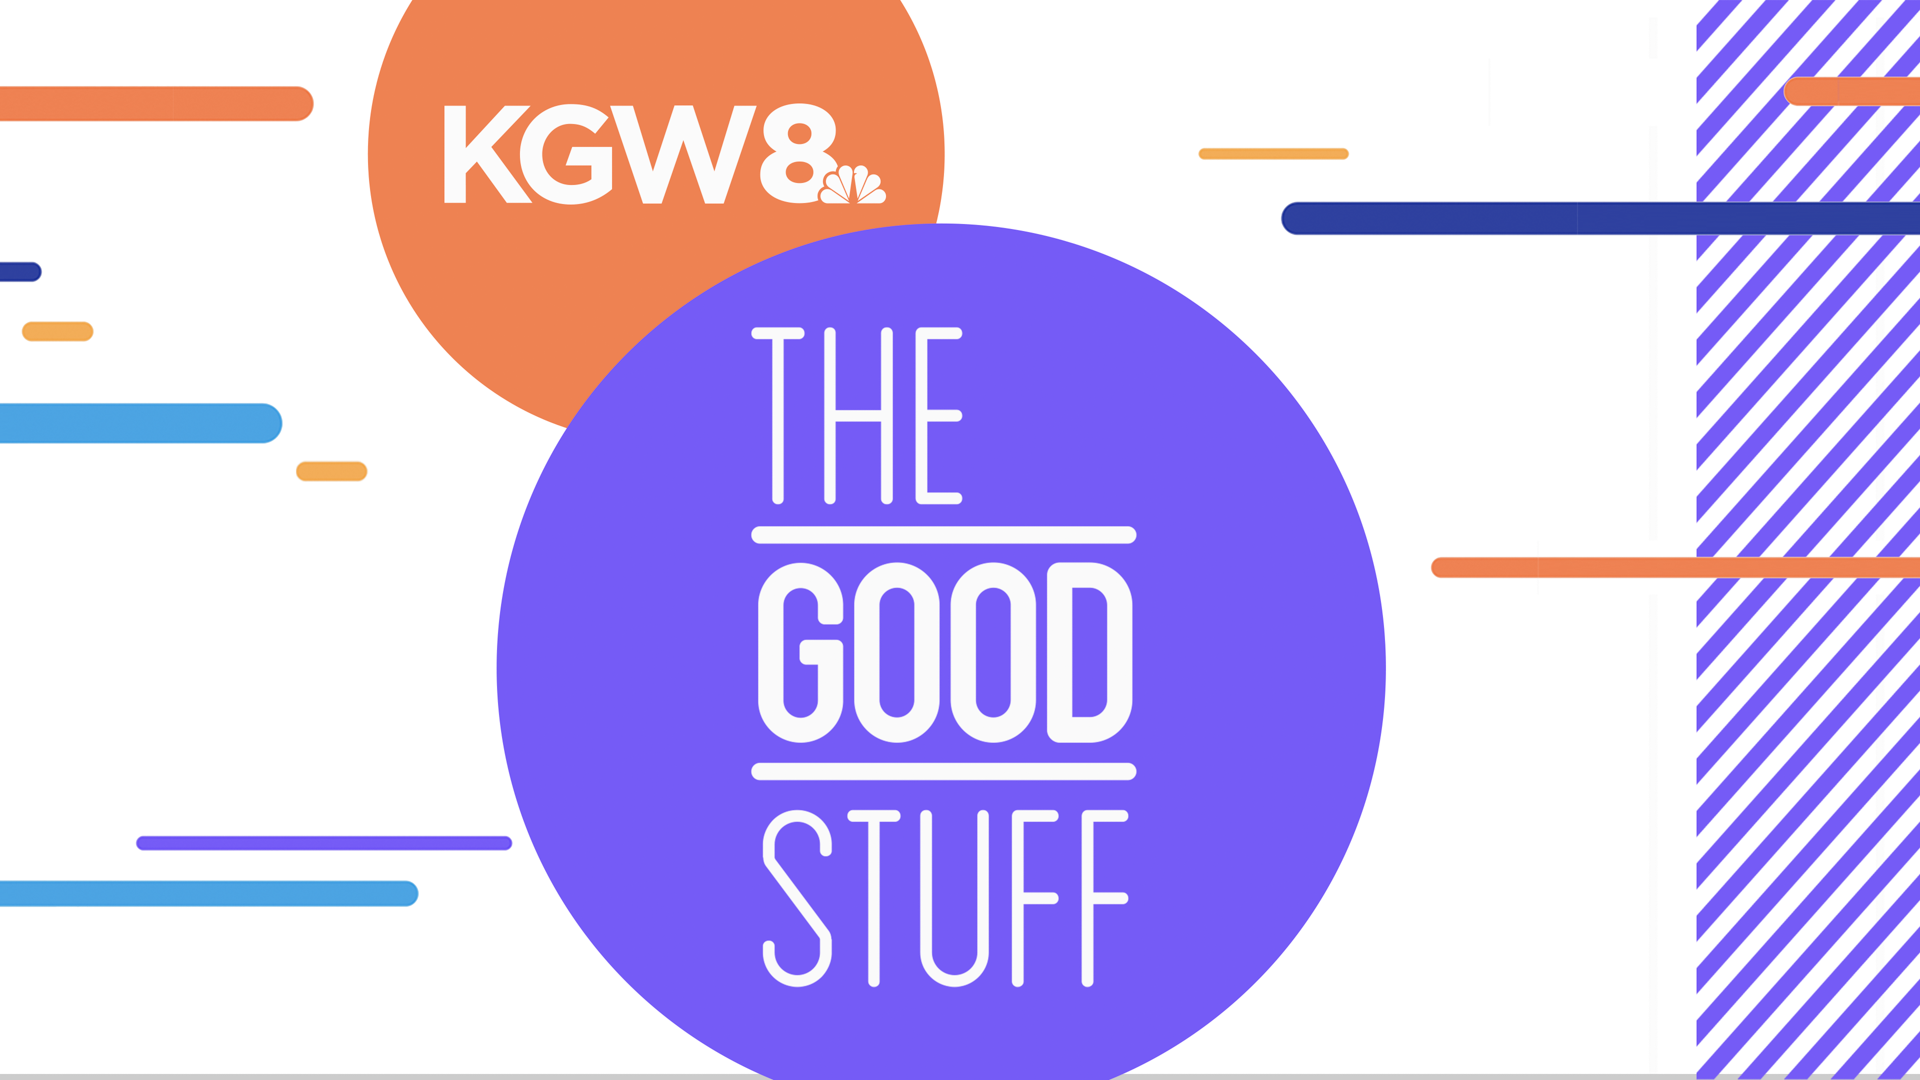 The Good Stuff highlights local stories of hope, optimism and solutions.